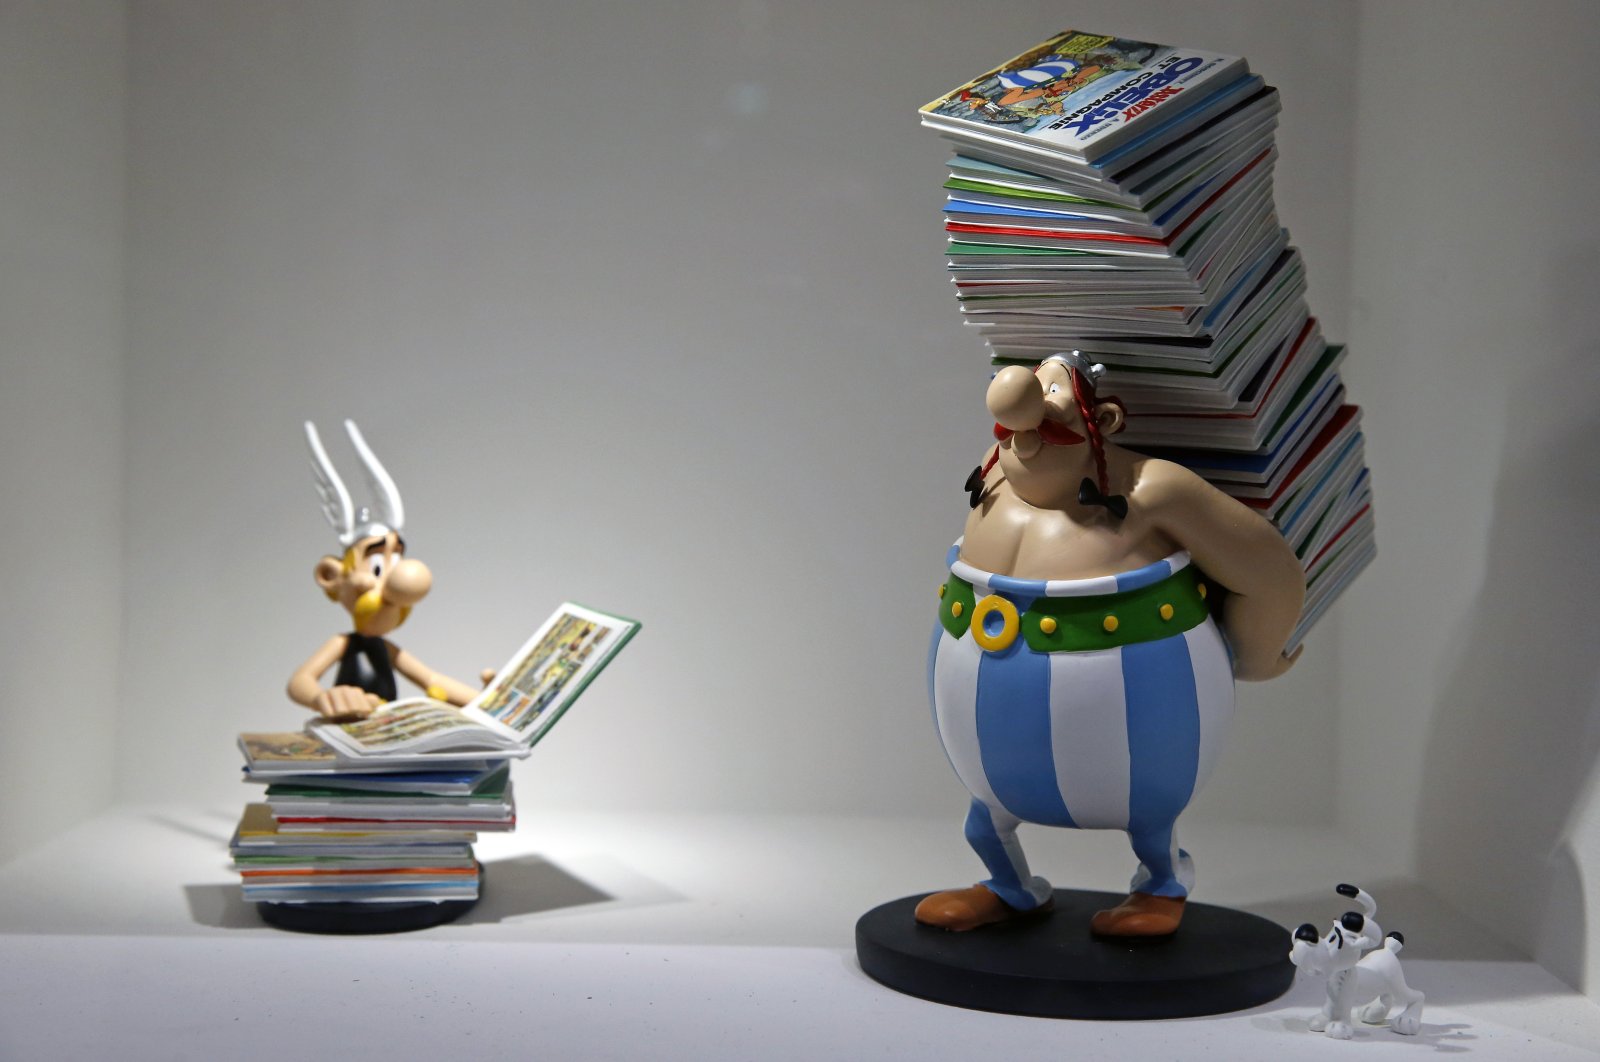 Figurines of characters of Asterix and Obelix created by French designer Uderzo are on display at the &quot;Uderzo, Comme Une Potion Magique&quot; (Uderzo, Like A Magic Potion) exhibition at the Maillol Museum, Paris, France, May 25, 2021. (Getty Images Photo)